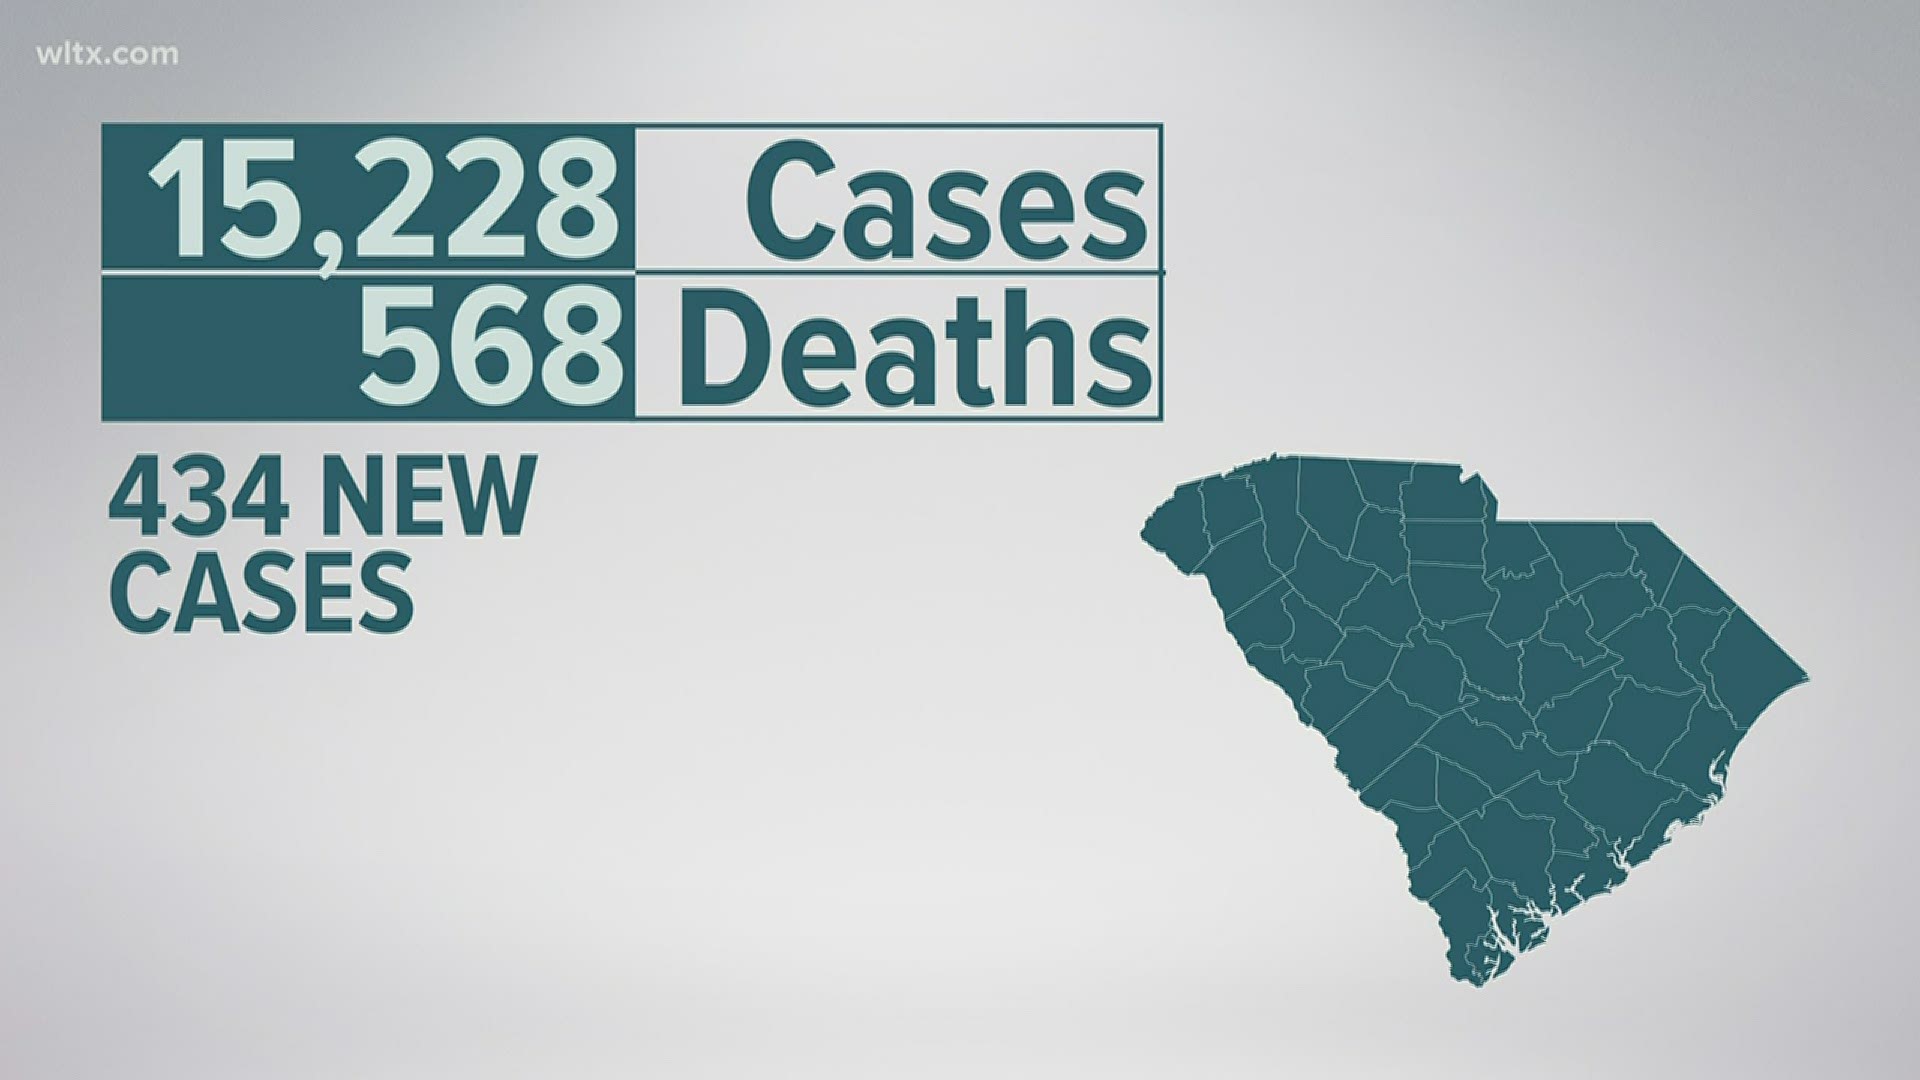 This brings the total number of people confirmed to have COVID-19 in South Carolina to 15,228 and those who have died to 568.